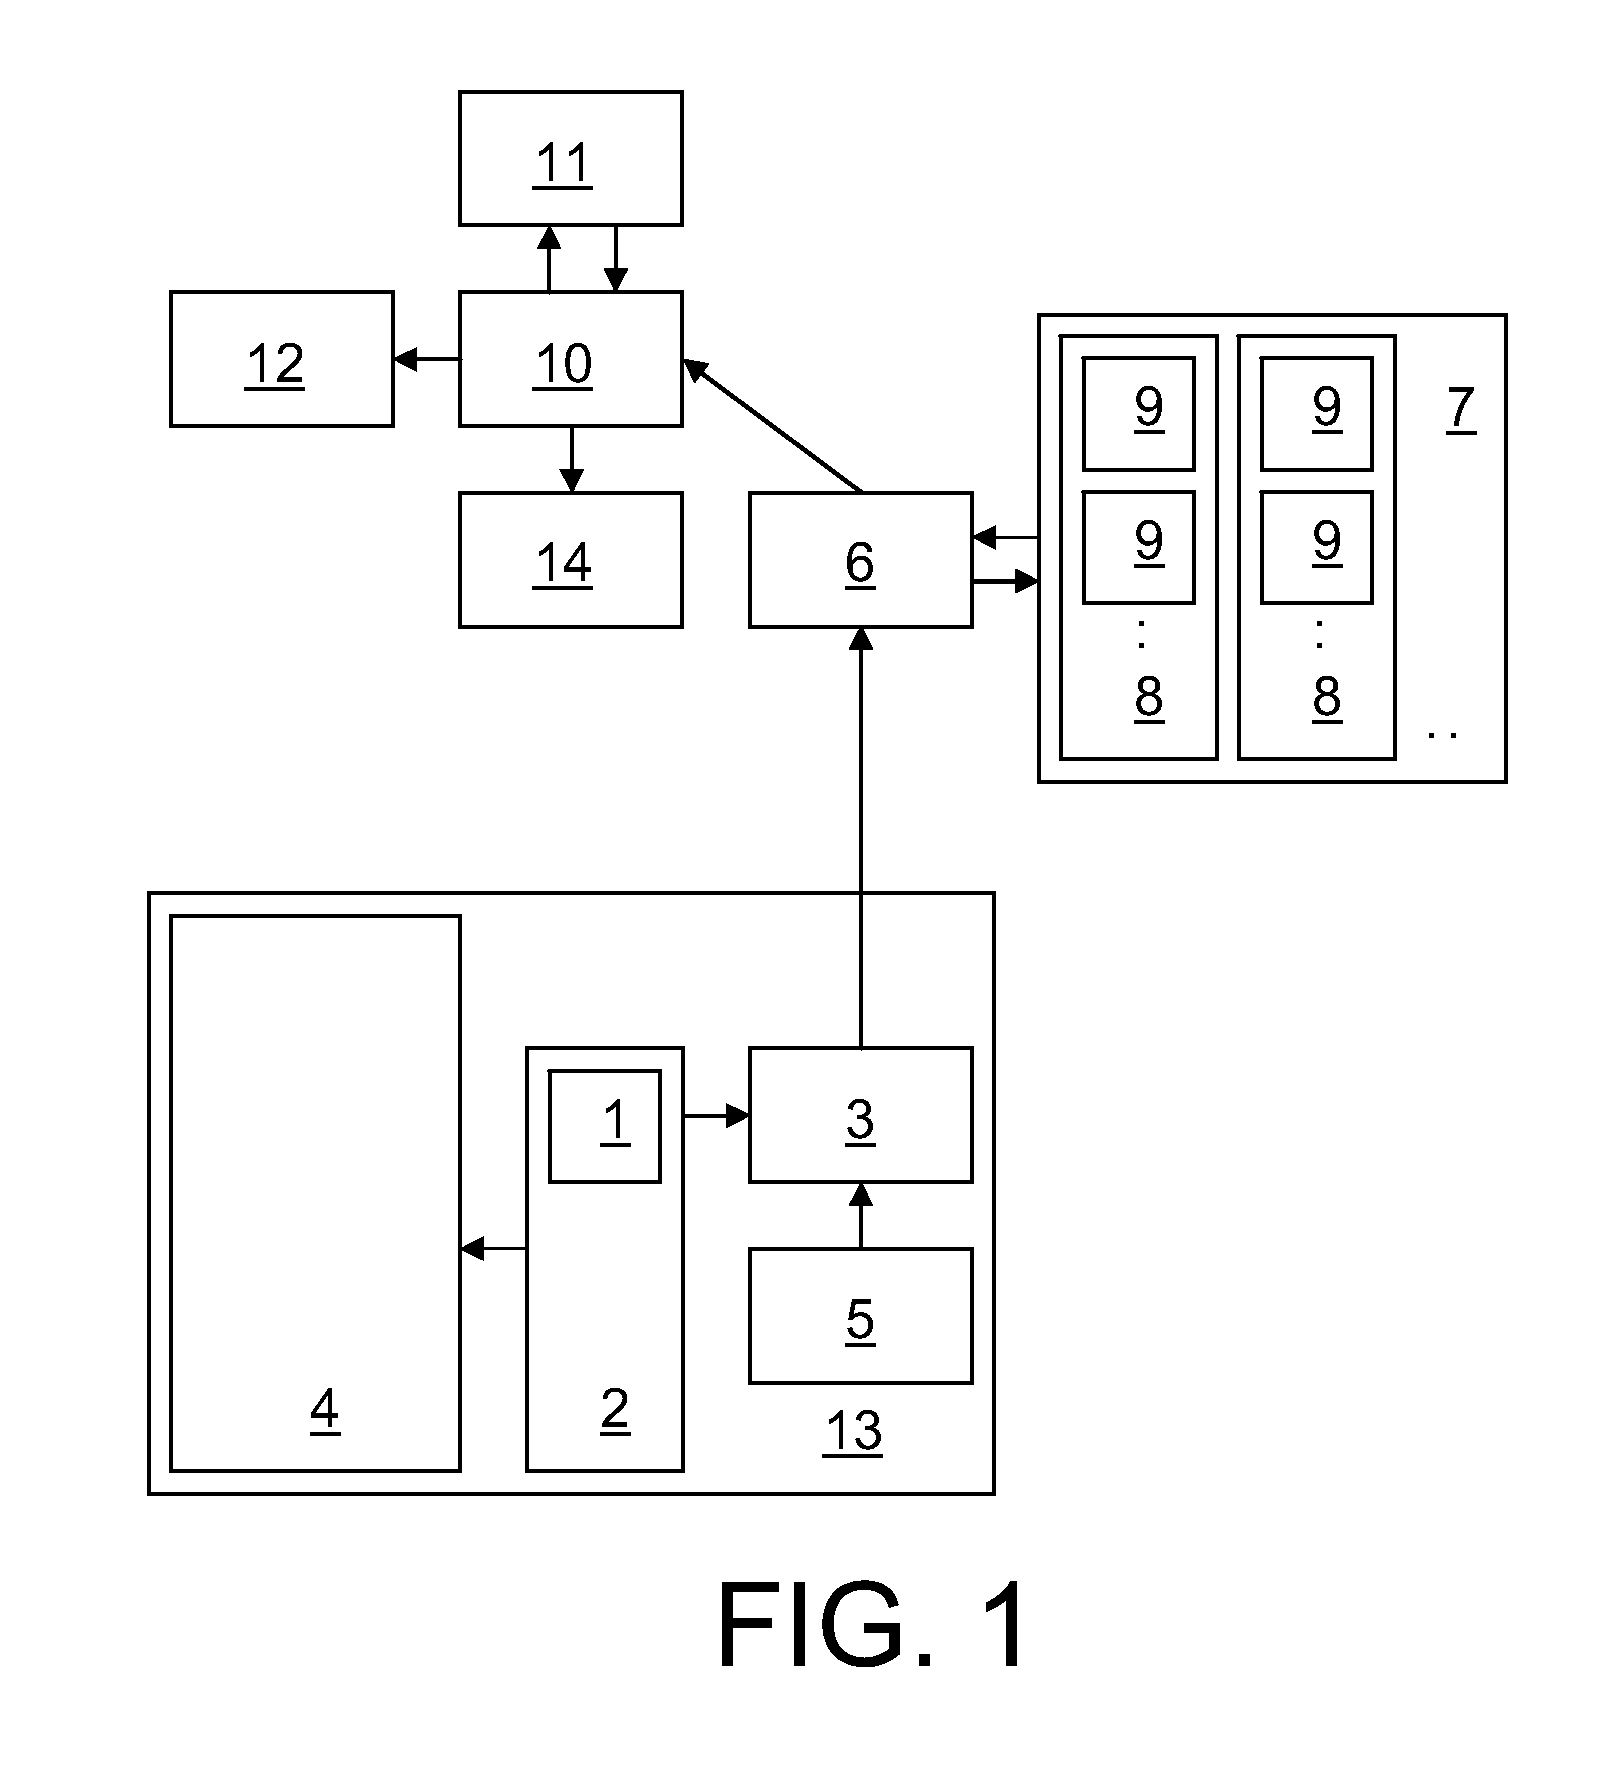 Automatic determination of an emission value for a motor vehicle